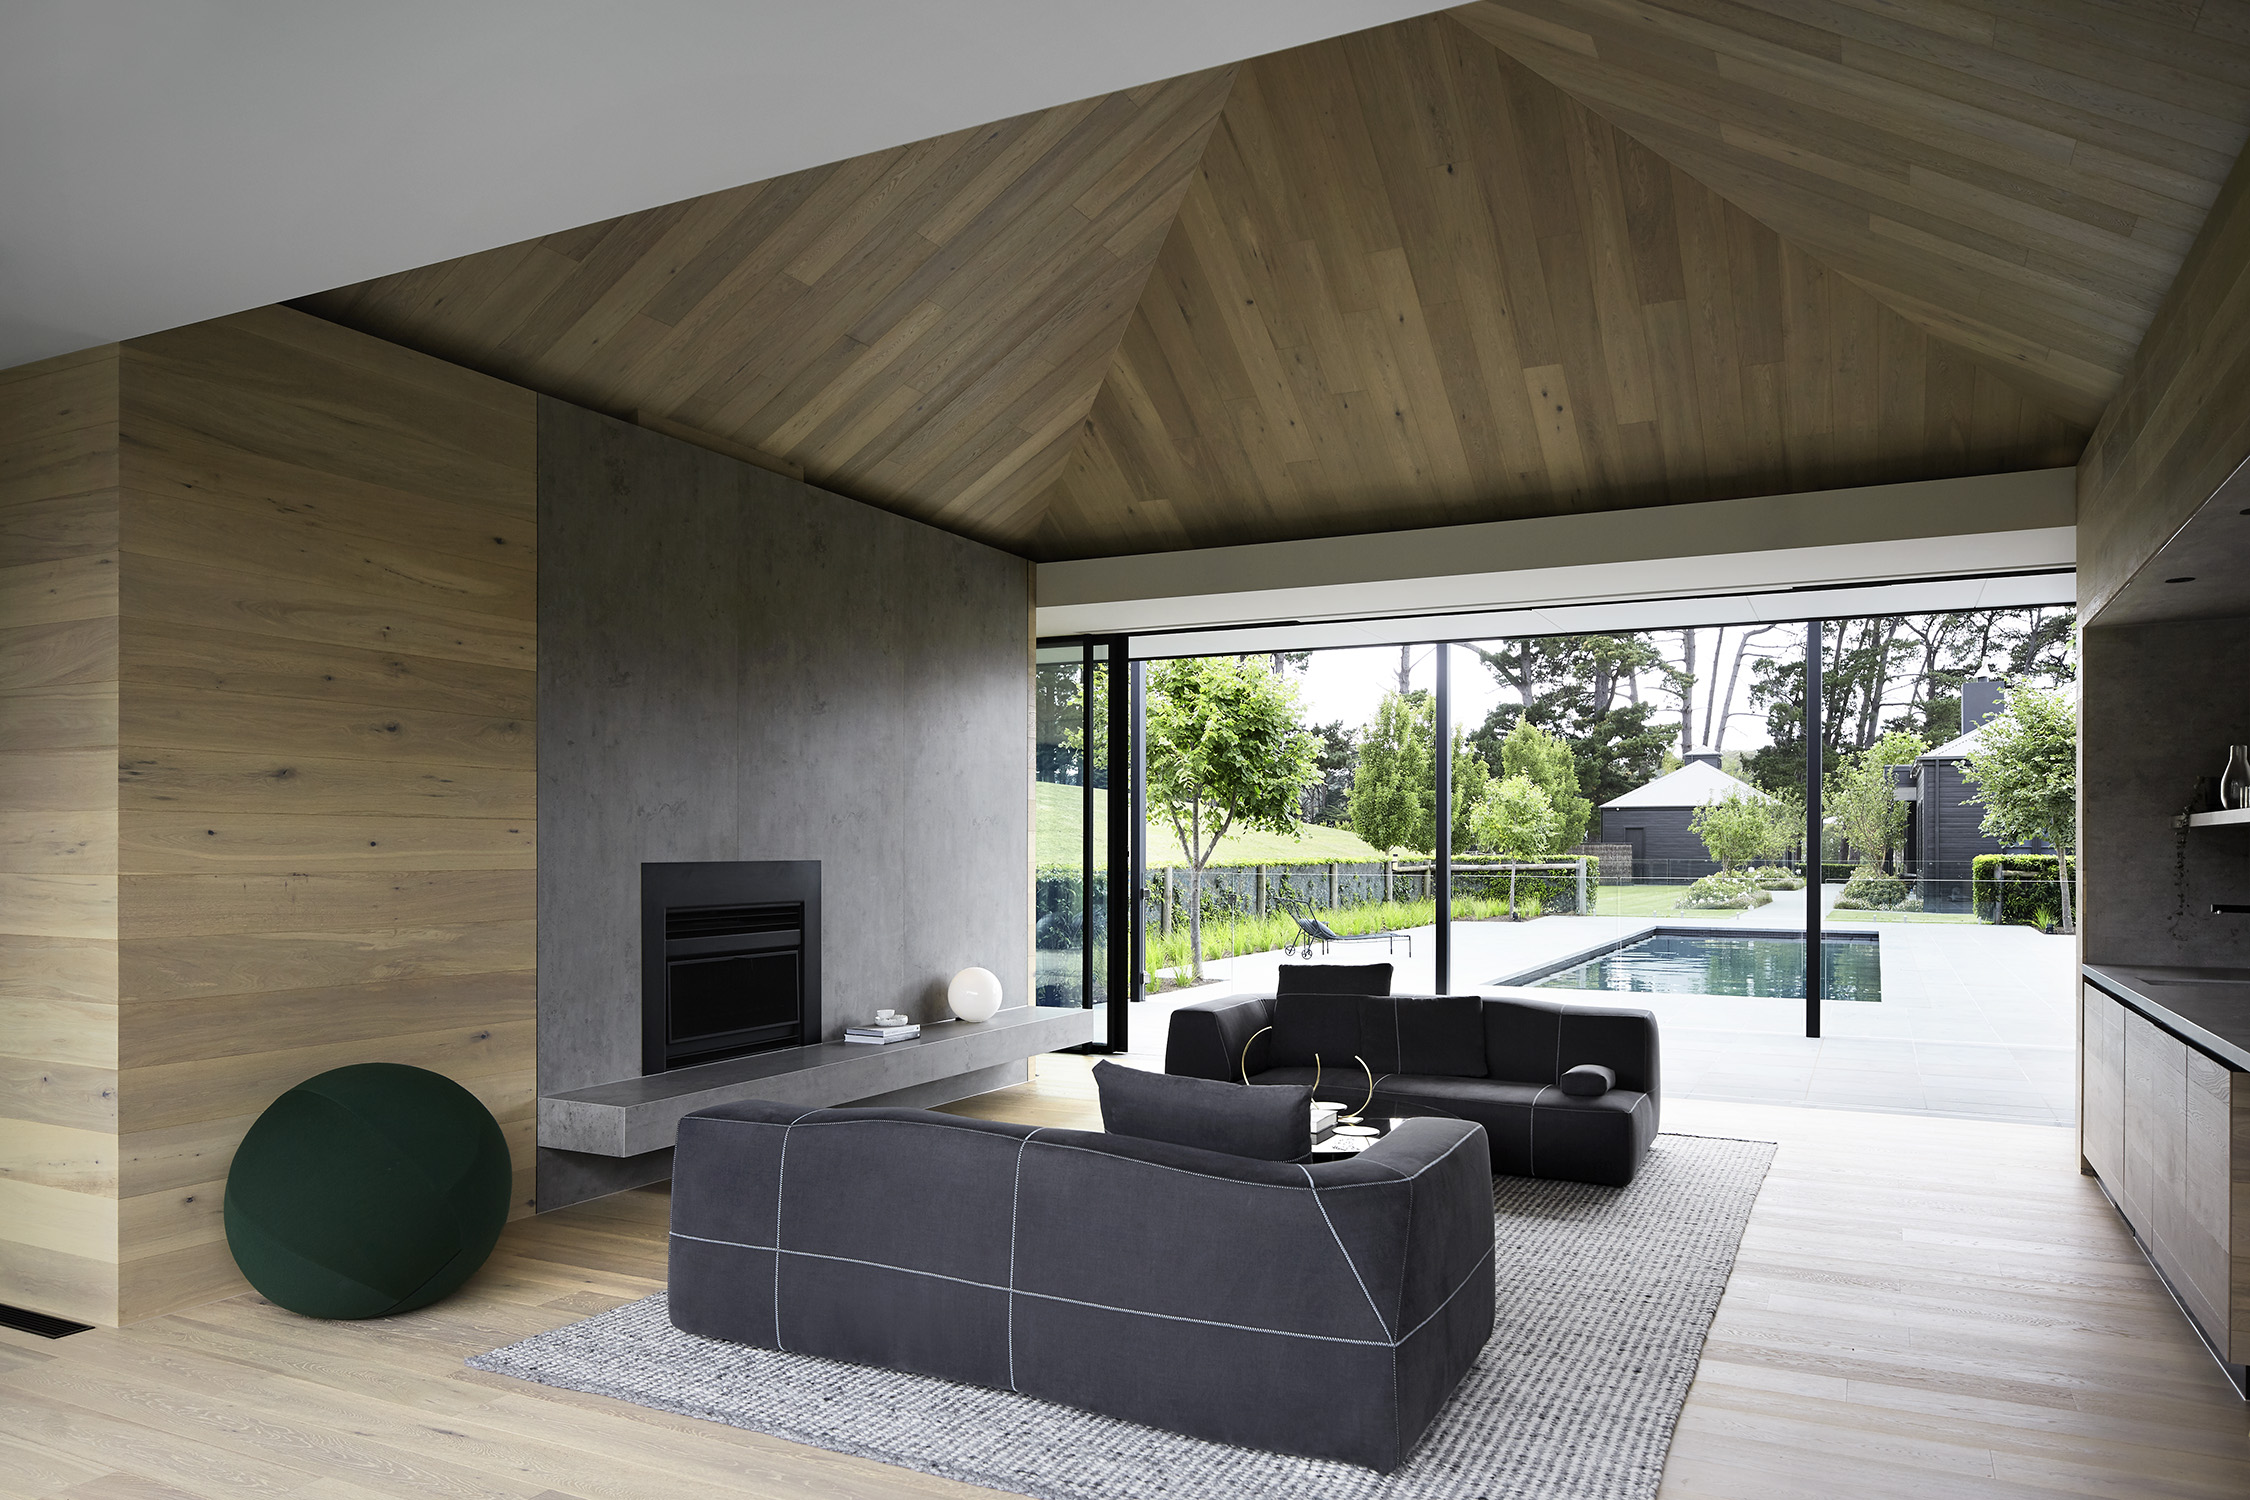 Pool Pavilion house by Russell Barrett Architects (4 of 4)